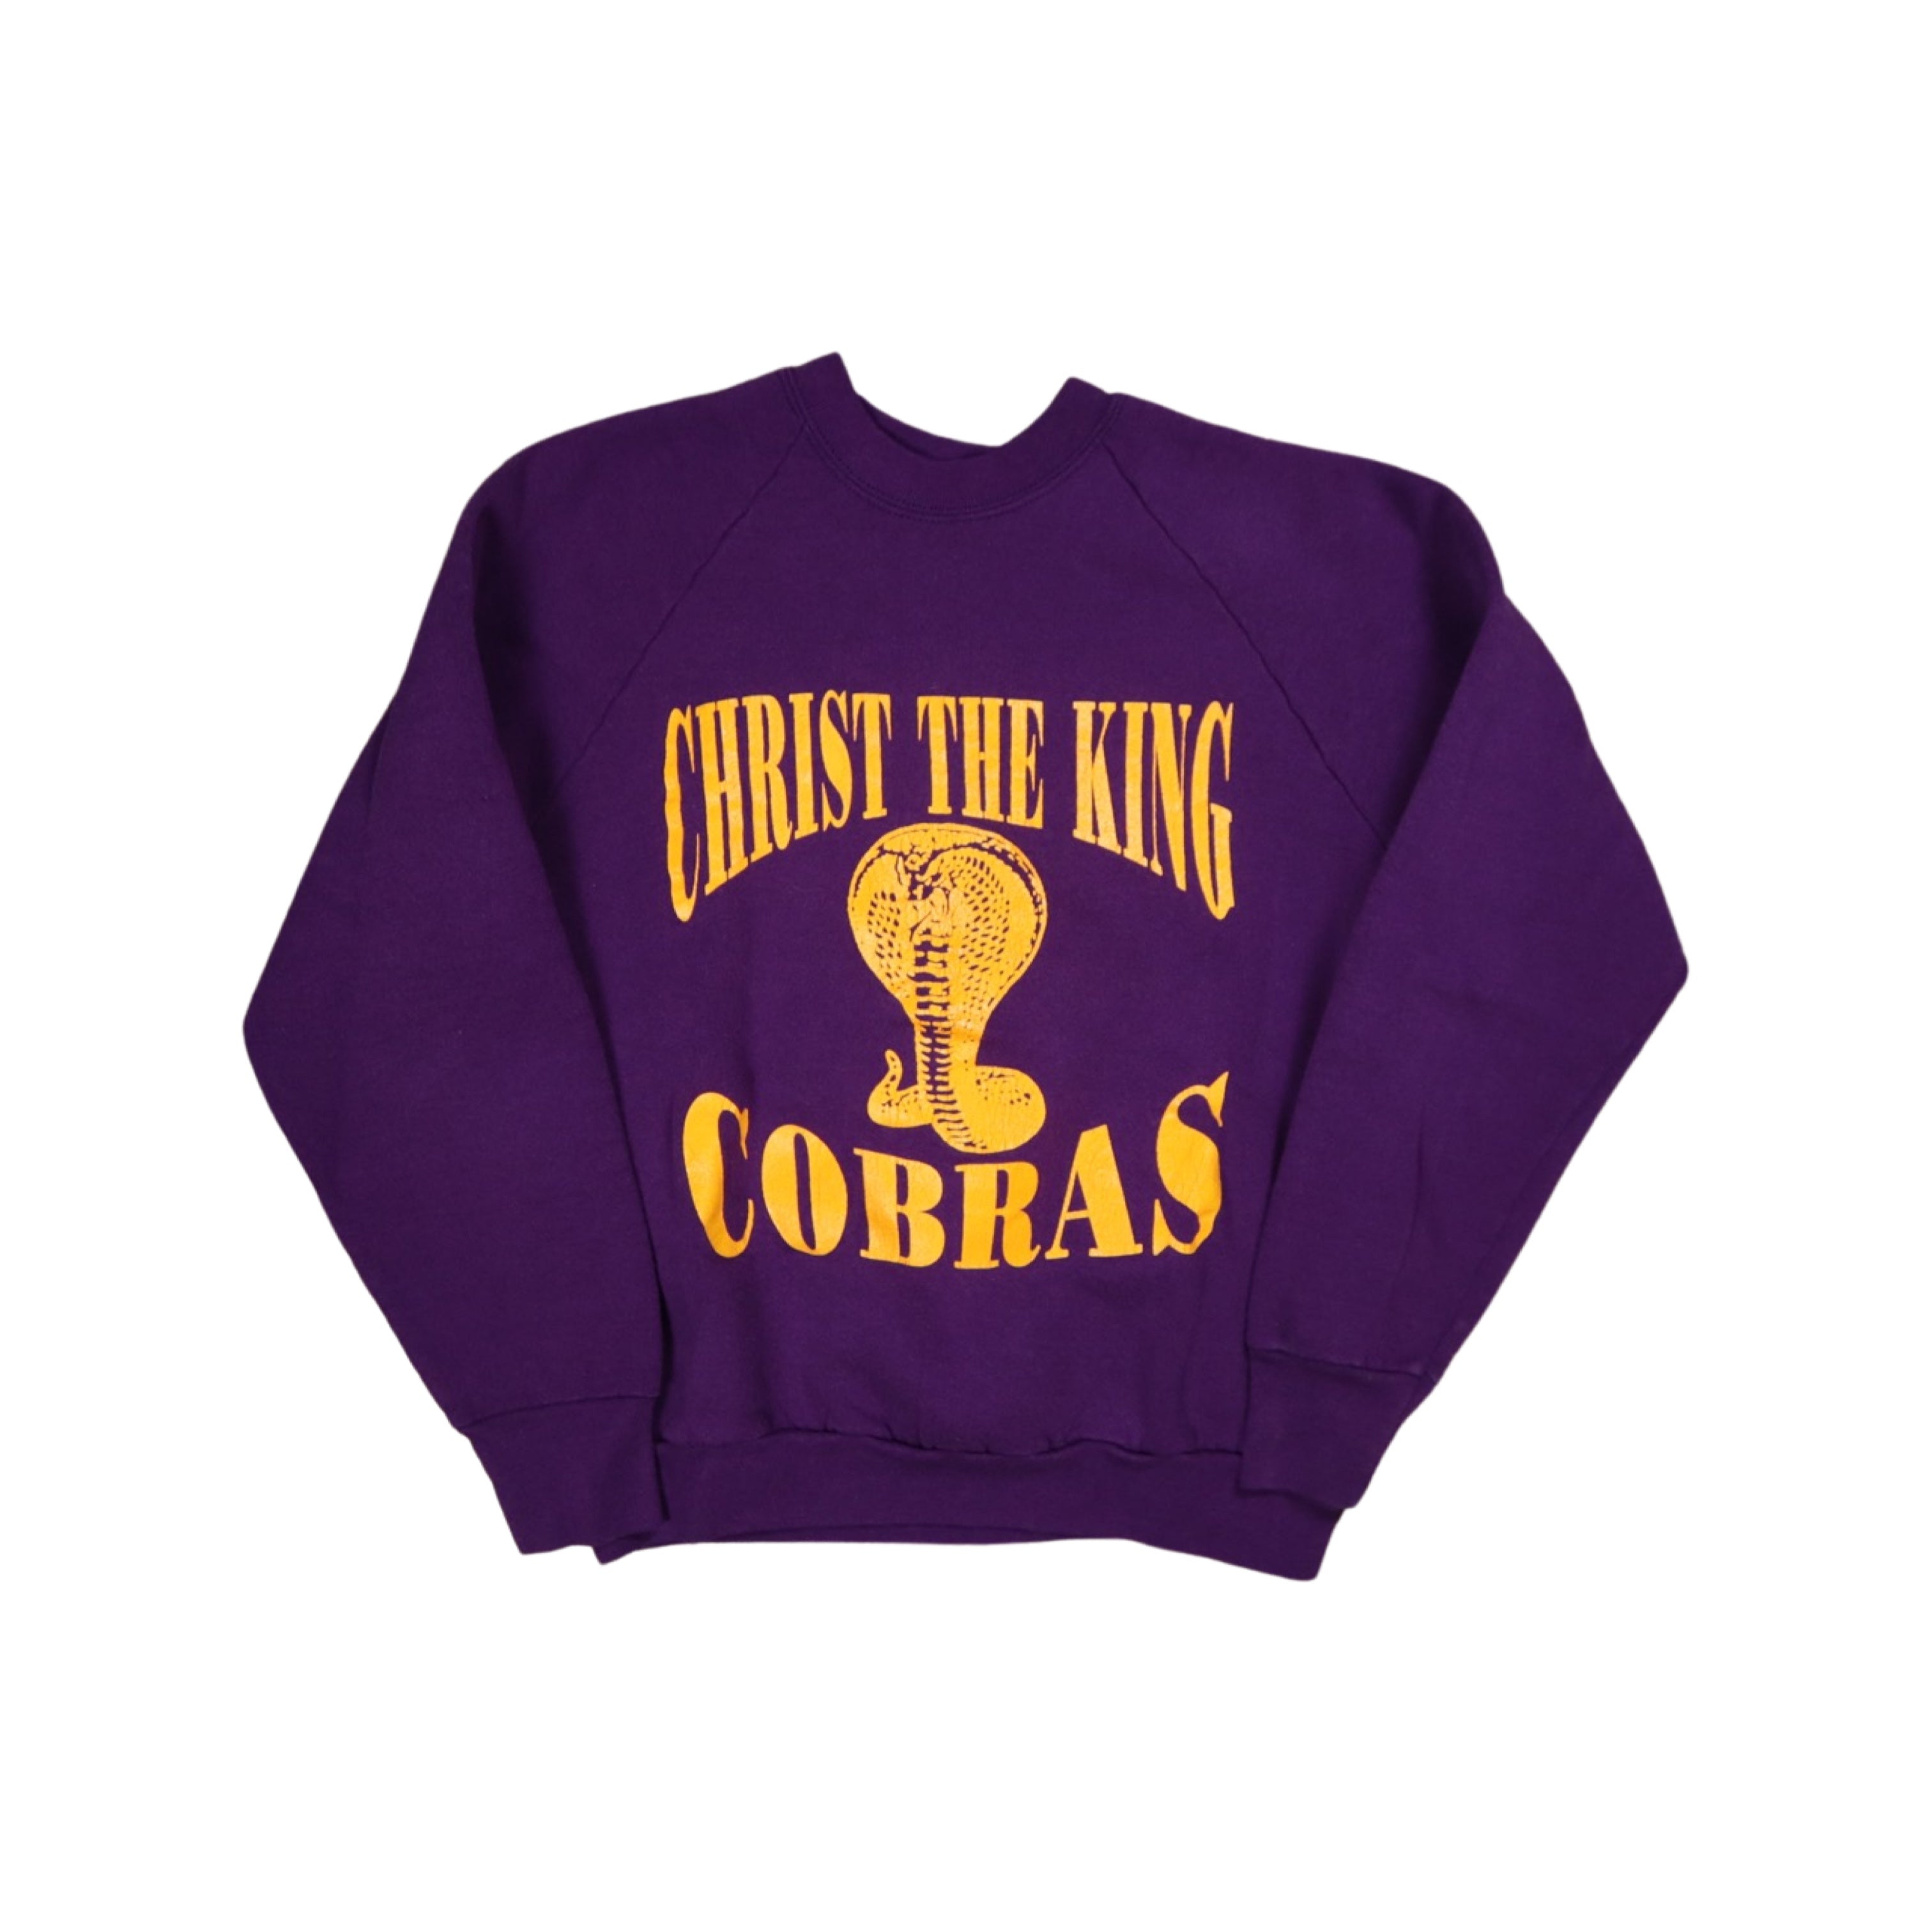 Christ is King Cobra 80s Sweater (Small)